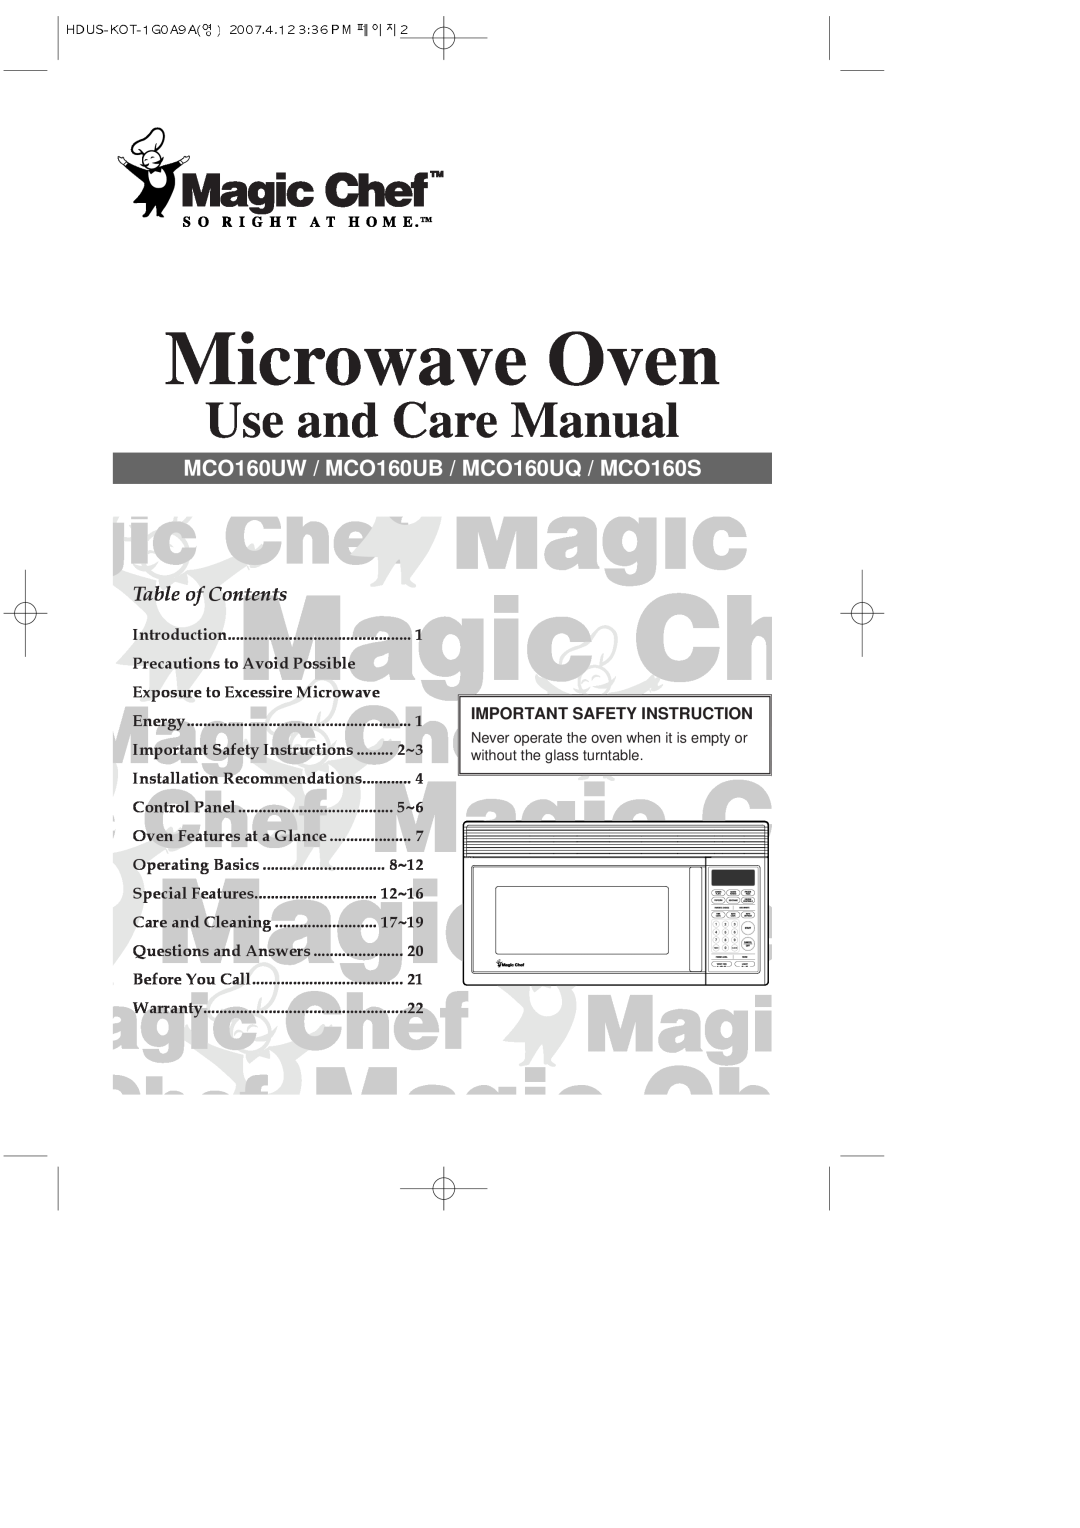 Magic Chef mco160ub, MCO160UQ, MCO160S important safety instructions Microwave Oven, Use and Care Manual, Table of Contents 